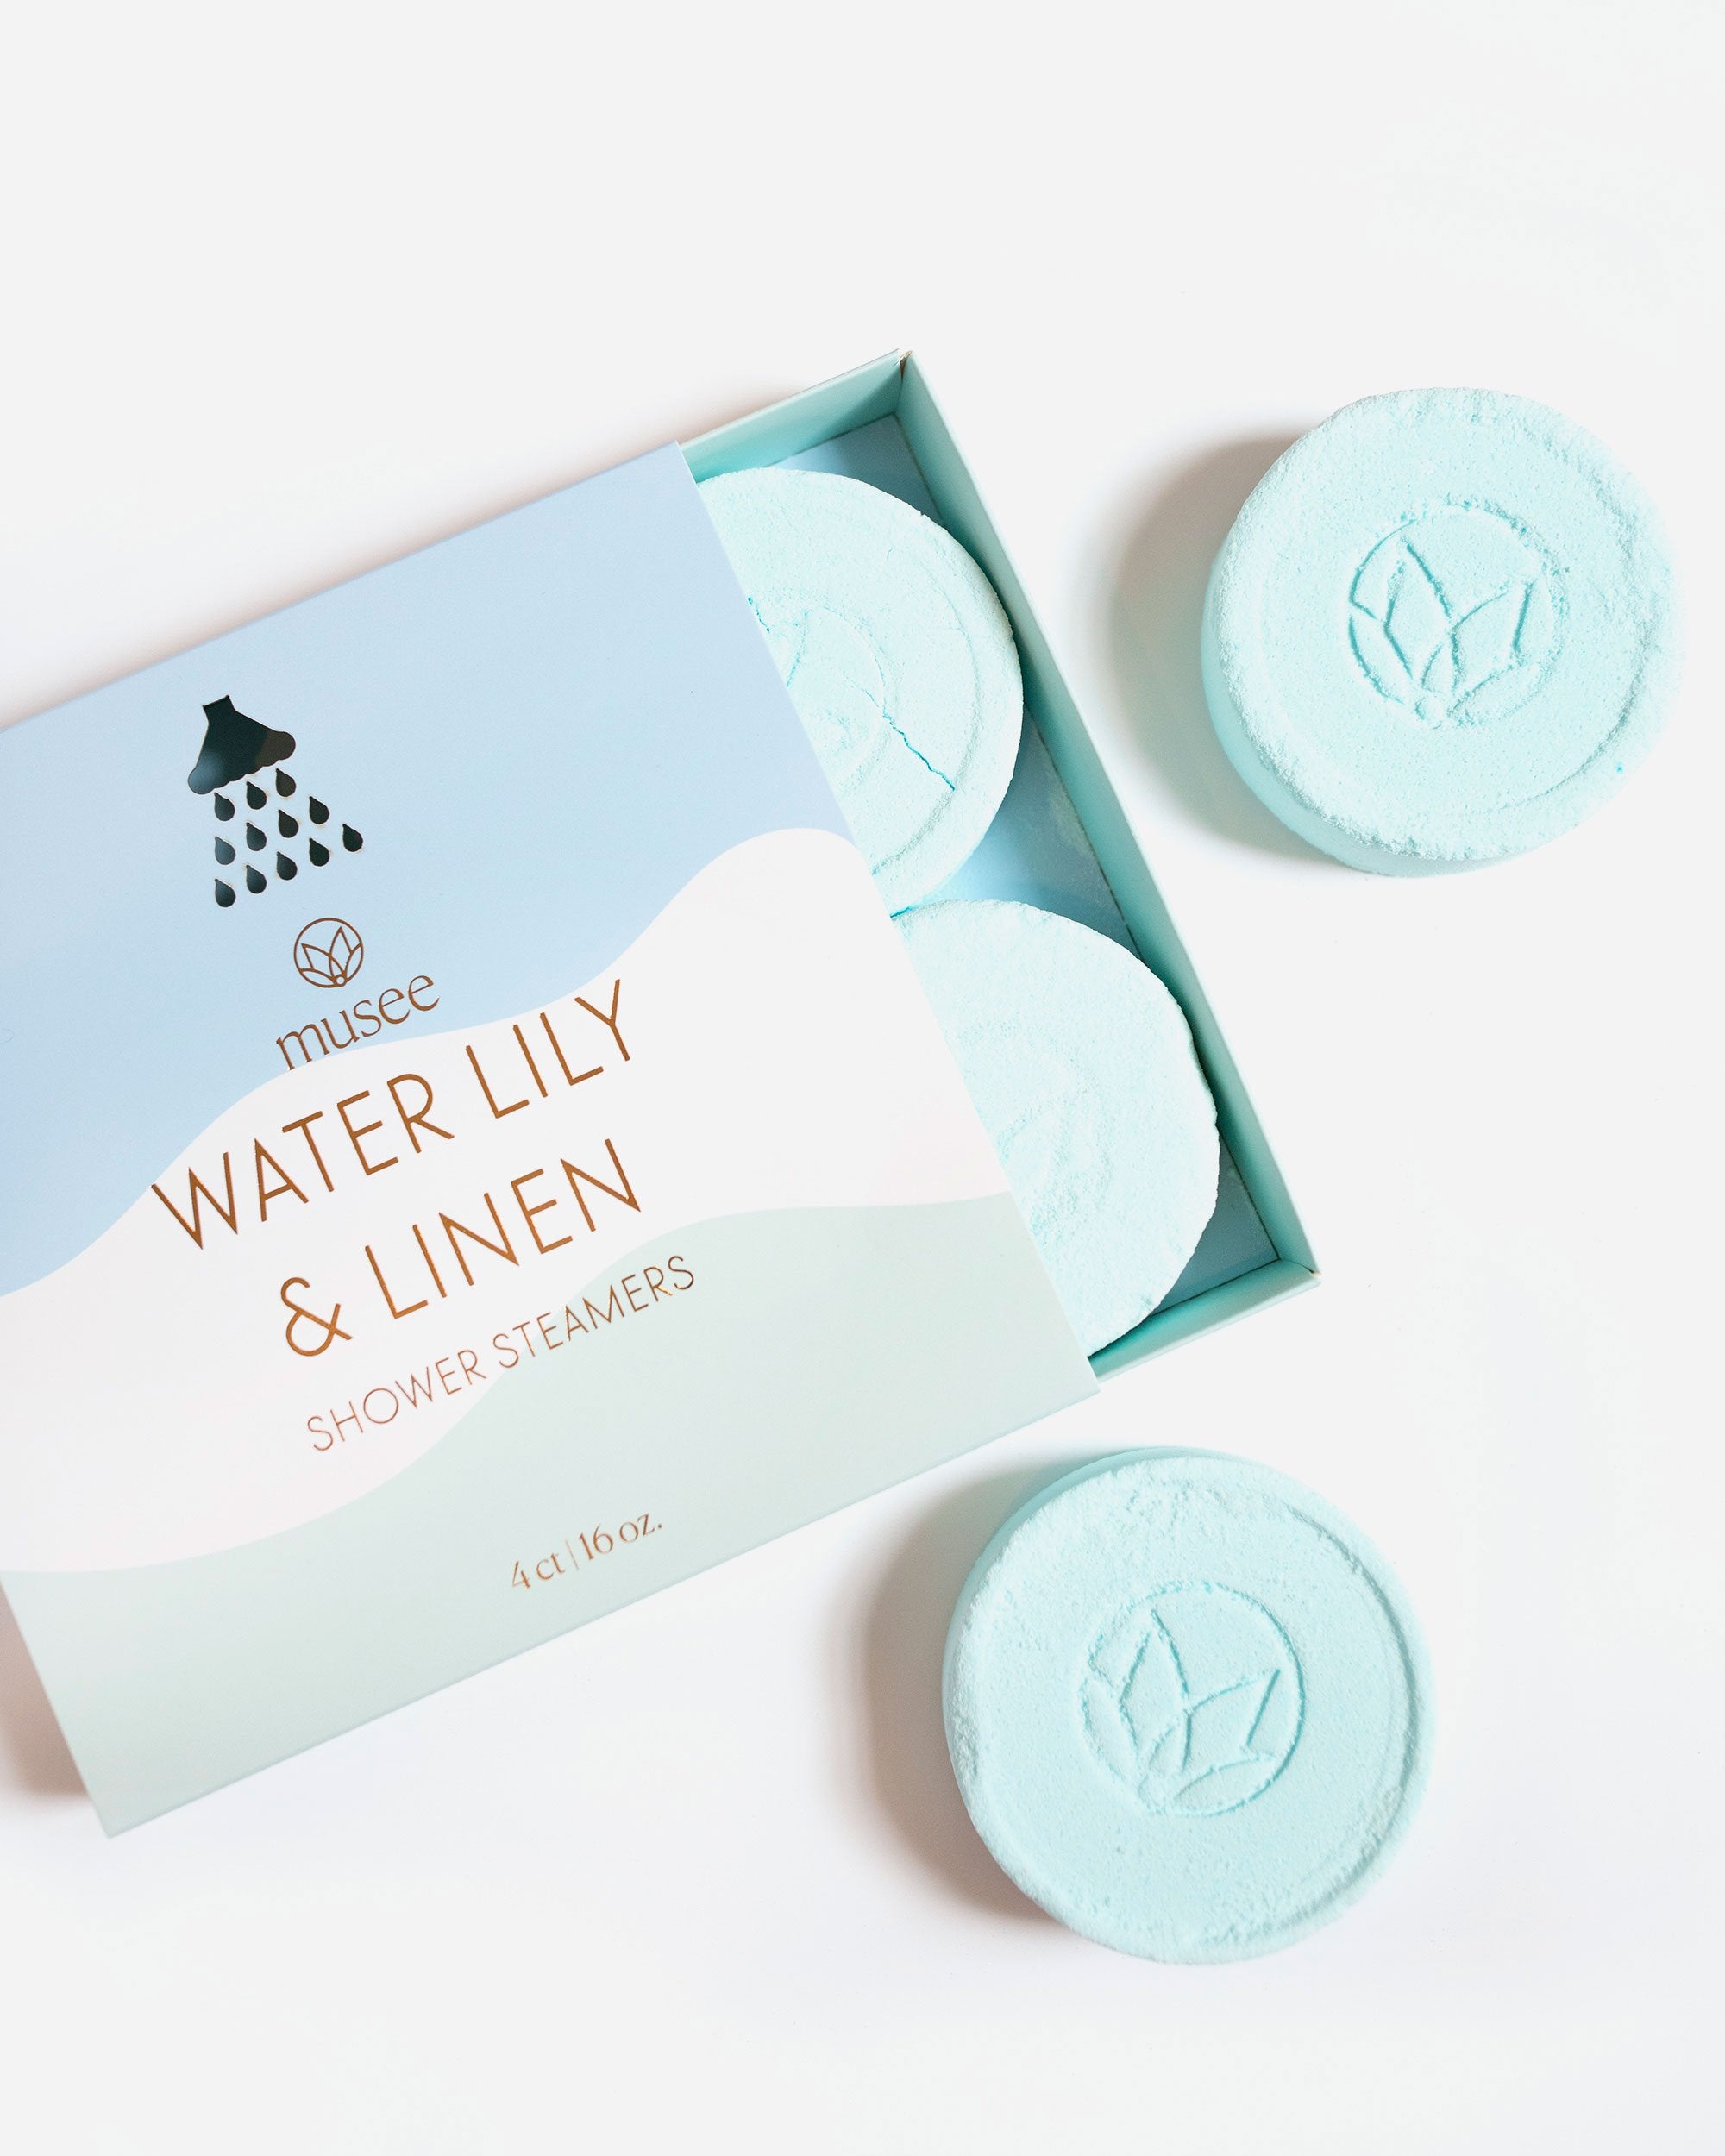 Water Lily & Linen Shower Steamers - Glow